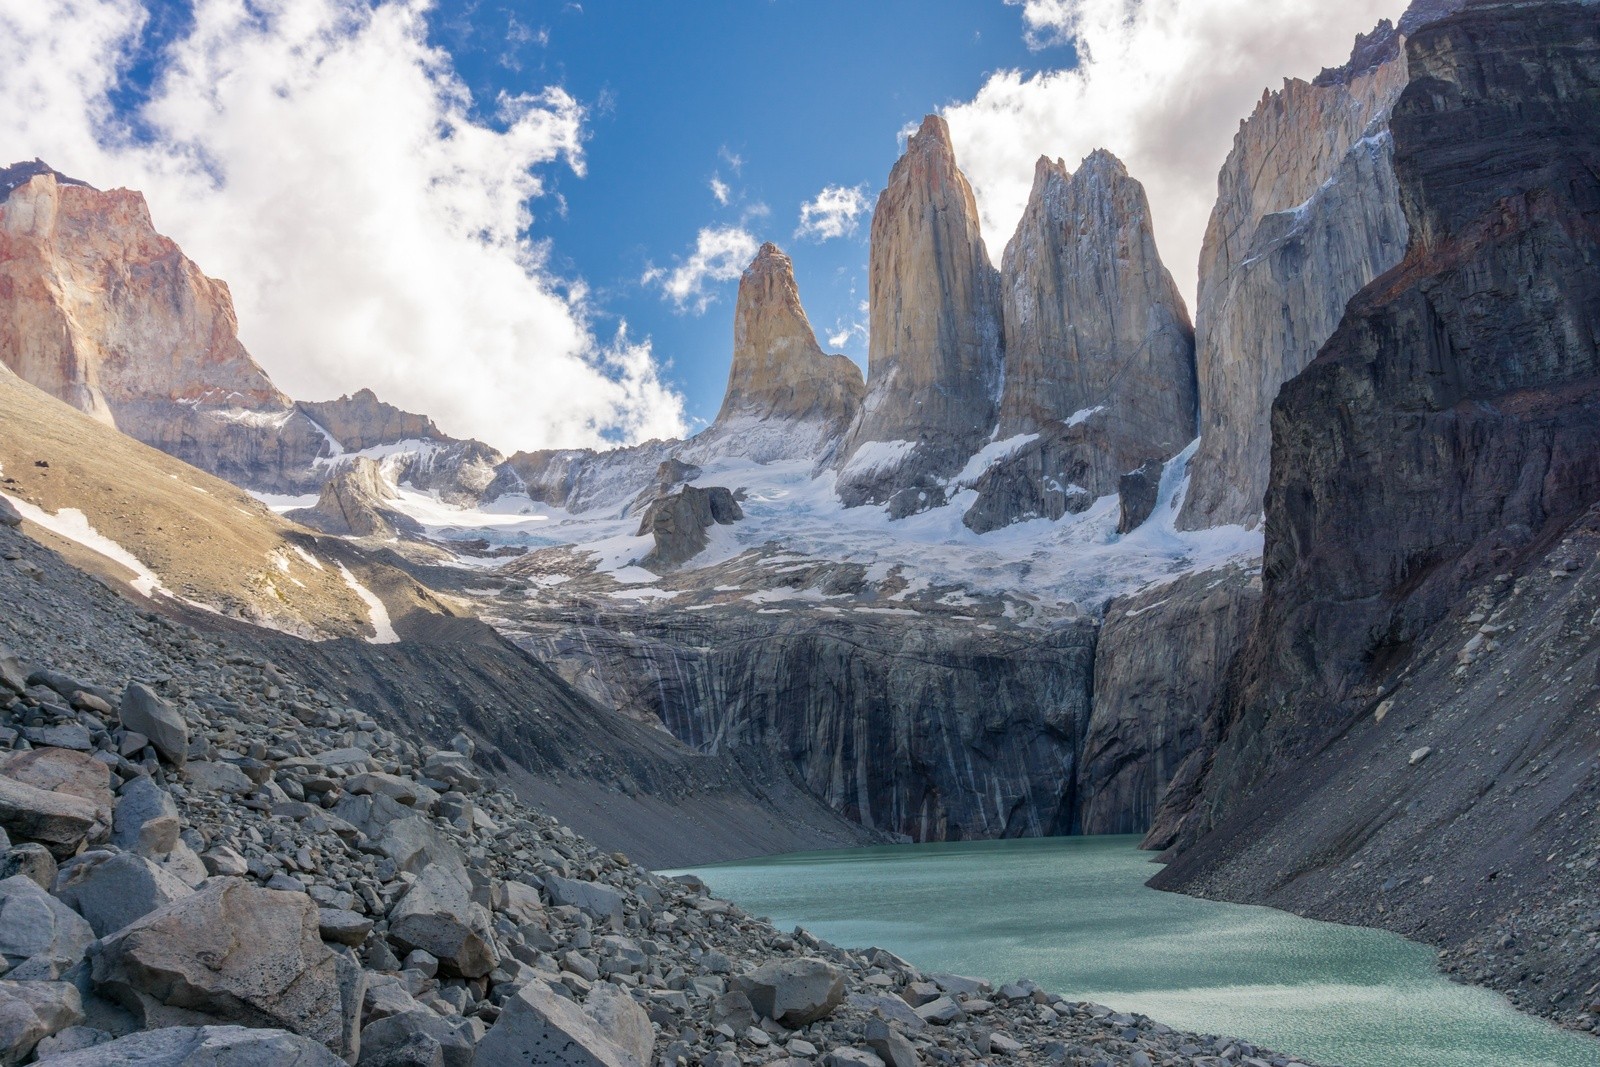 The Torres del Paine in Patagonia.